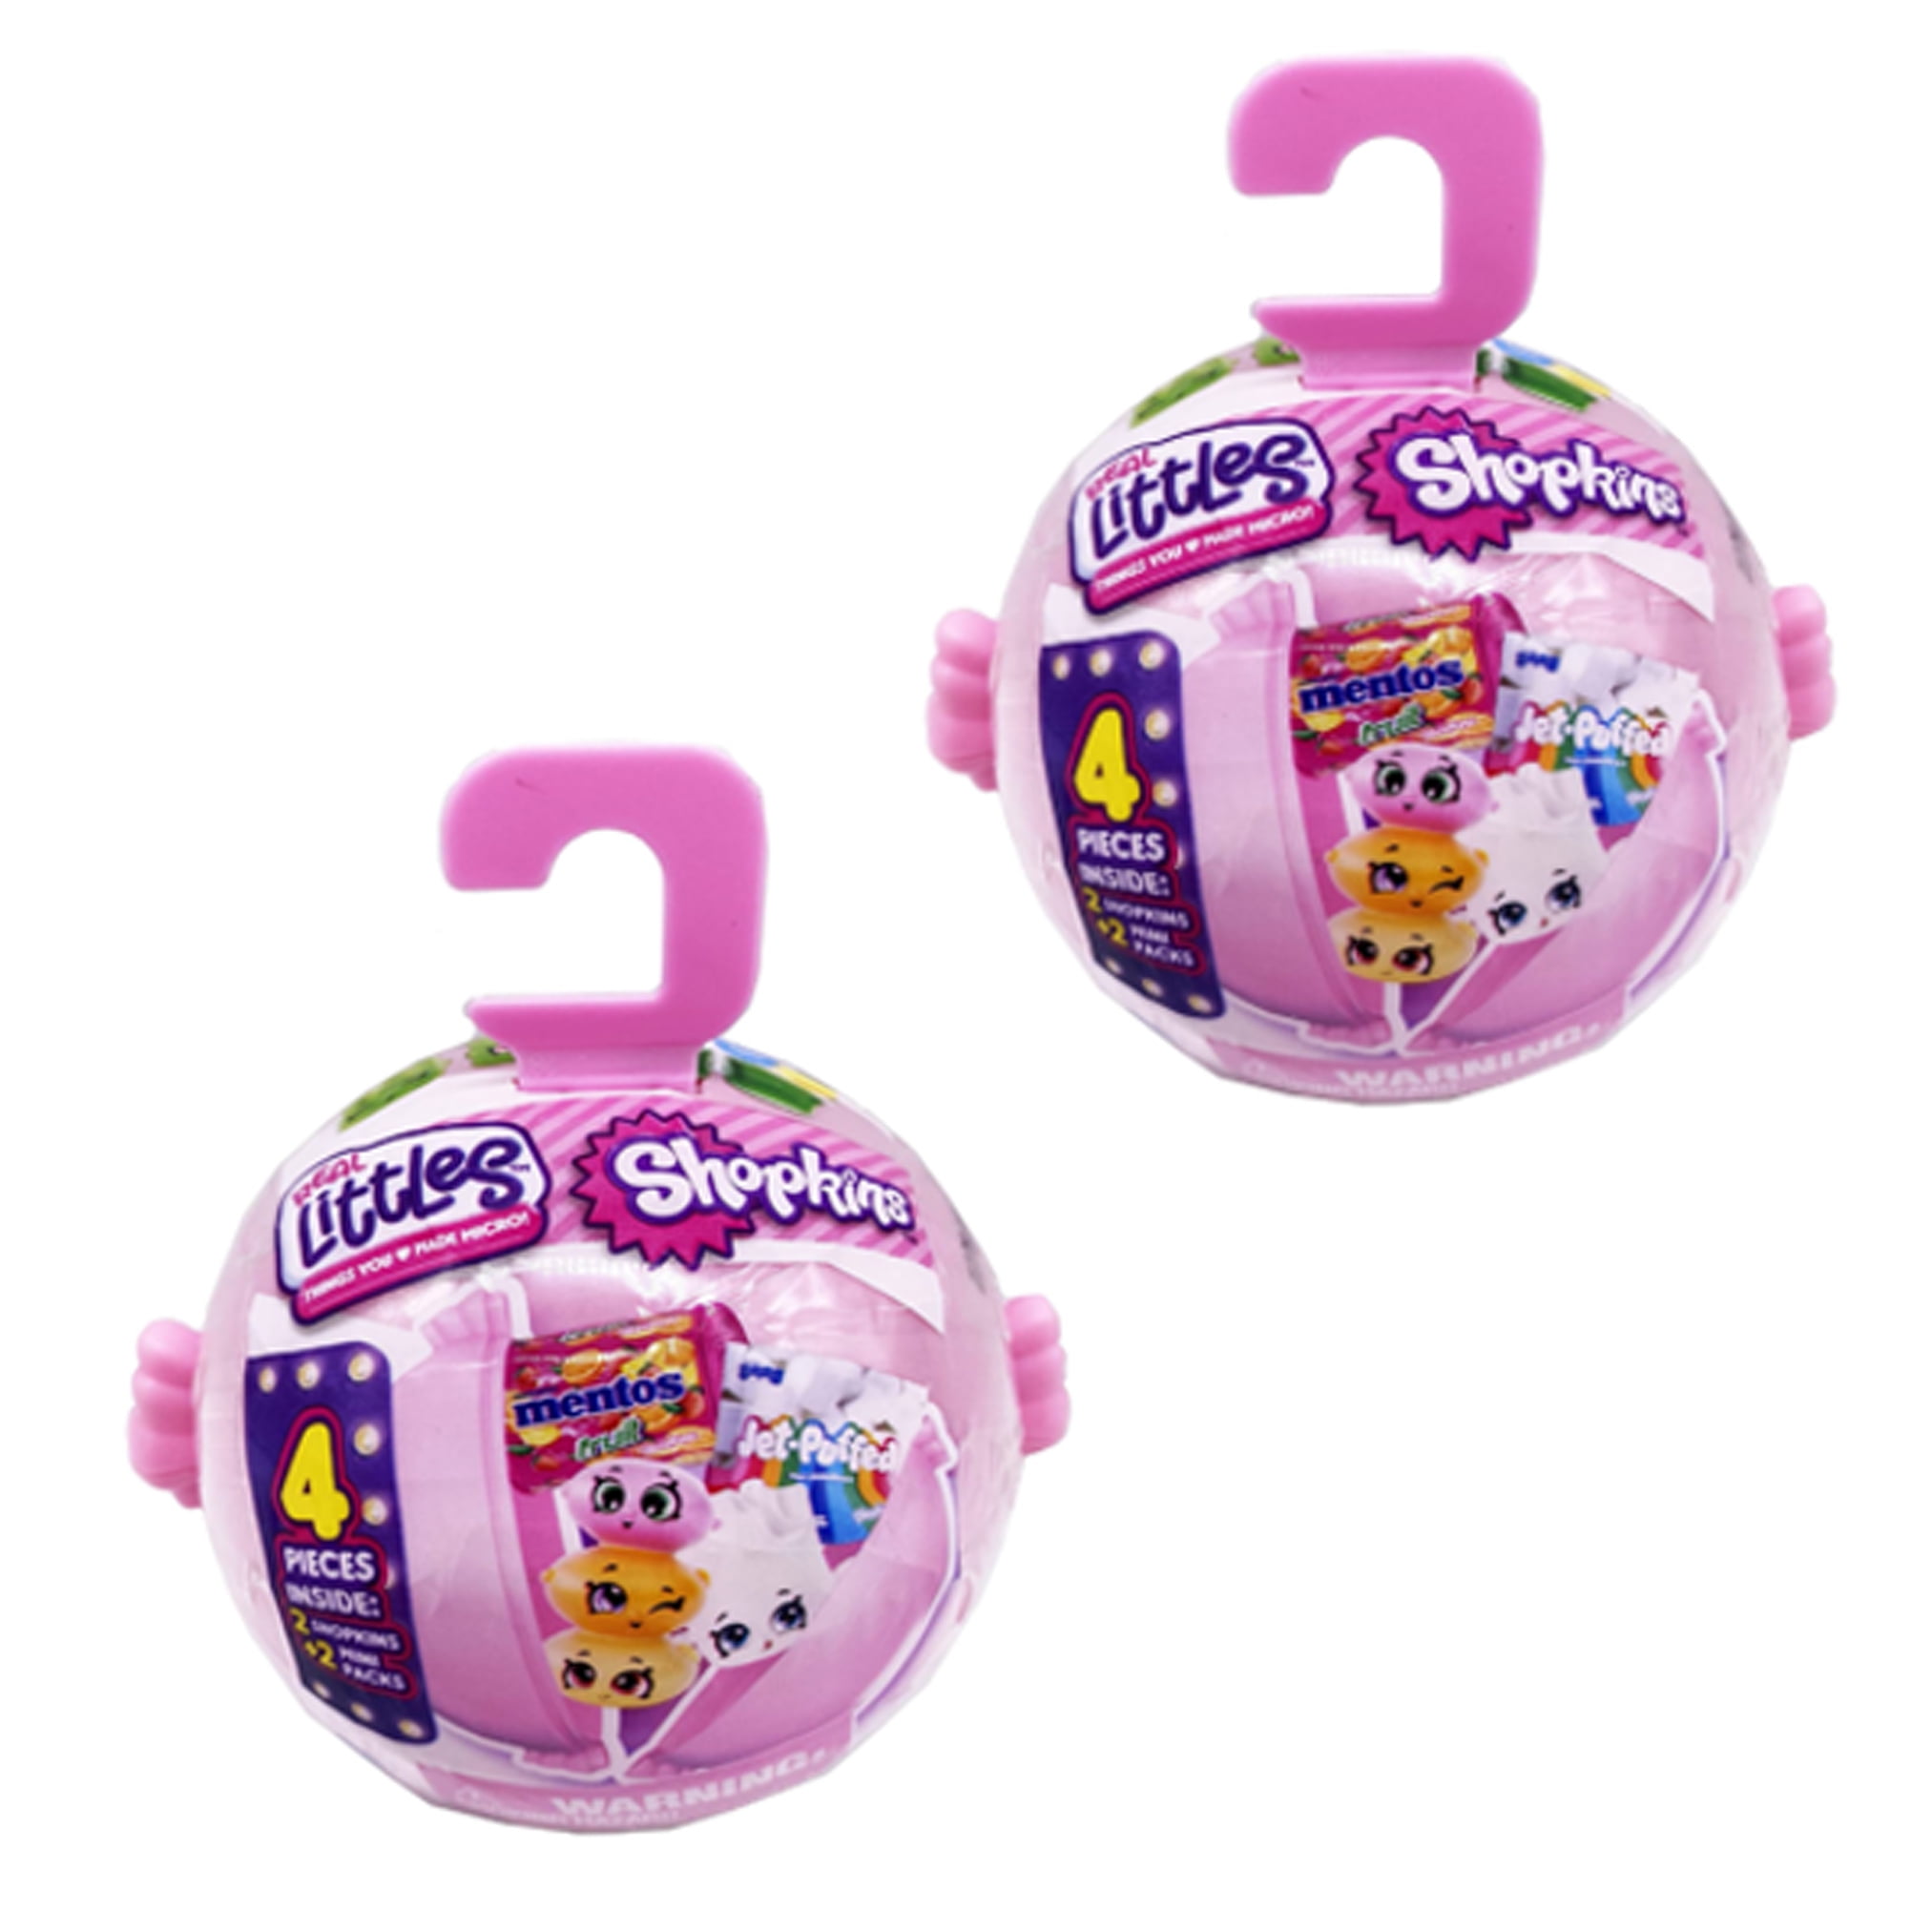 Shopkins Real Littles Snack Time! Mystery Pack [Capsule Ball, 2